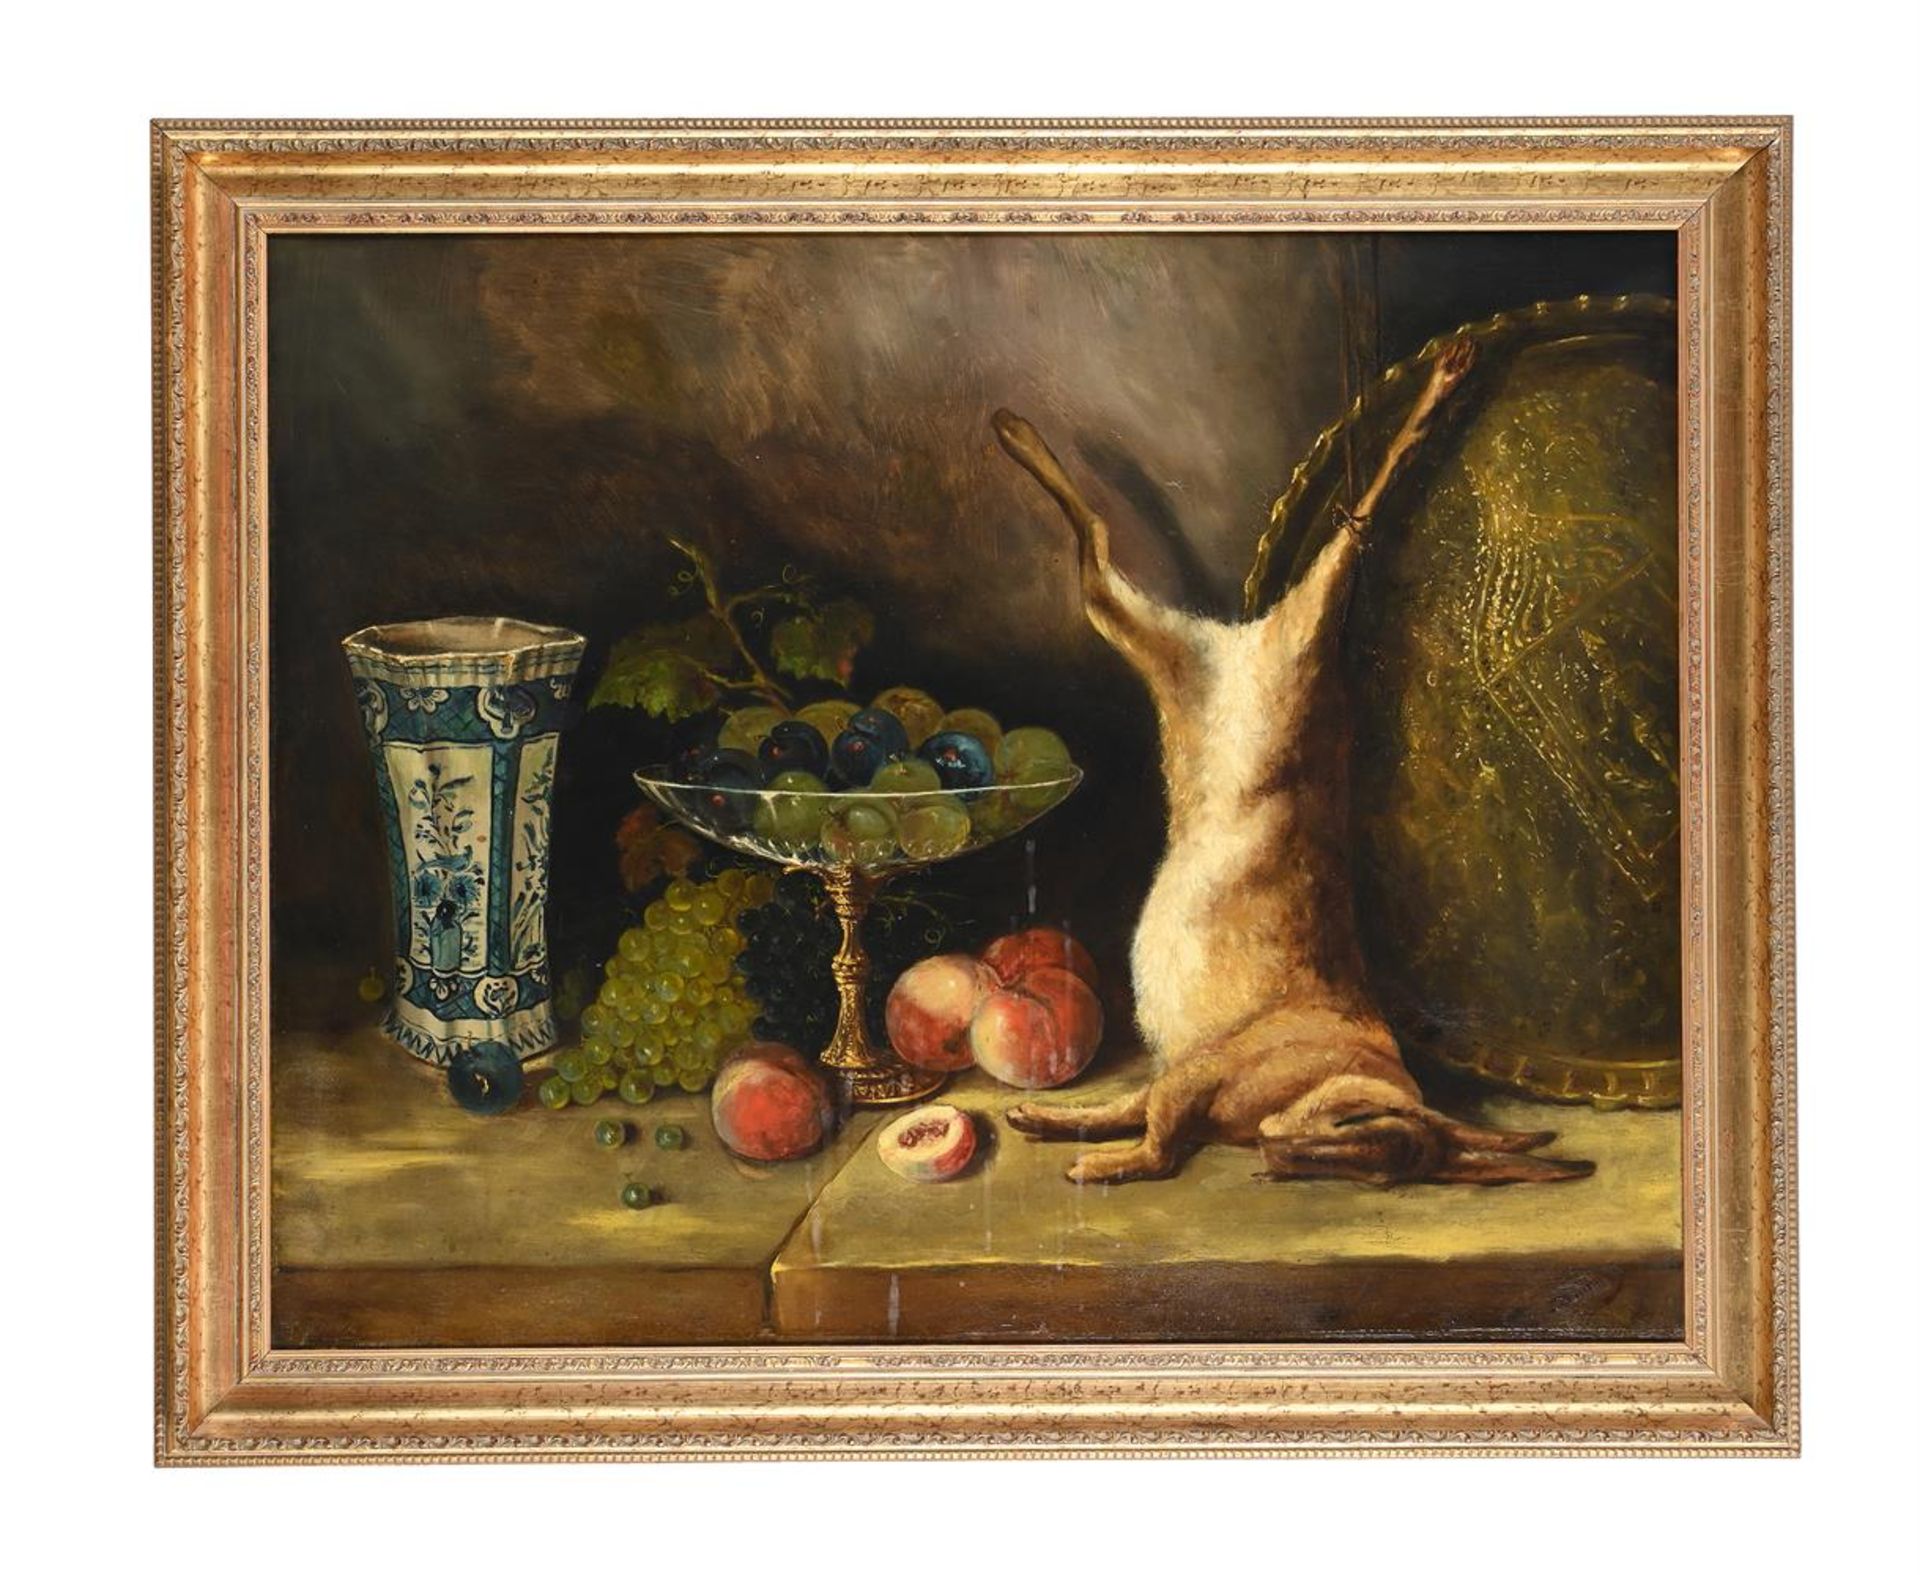 DUTCH SCHOOL (19TH CENTURY), STILL LIFE WITH GAME AND A PORCELAIN VASE